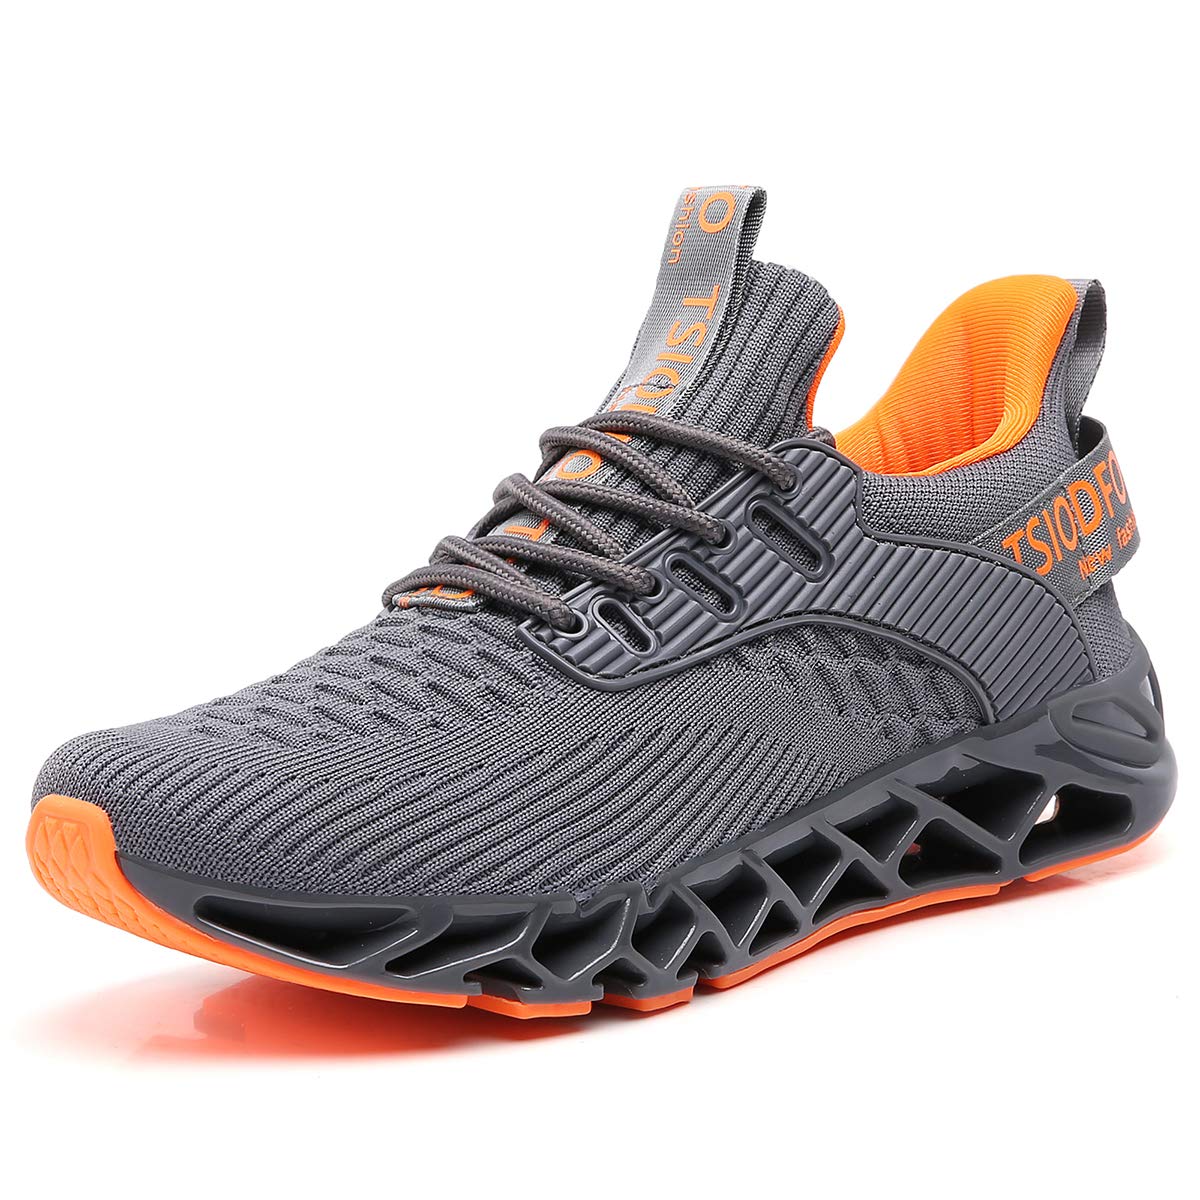 Ezkrwxn Men Sport Running Shoes Mesh Breathable Comfort Fashion Casual Tennis Athletic Walking Sneakers Gym Runner Jogging Shoe Grey Size 11.5